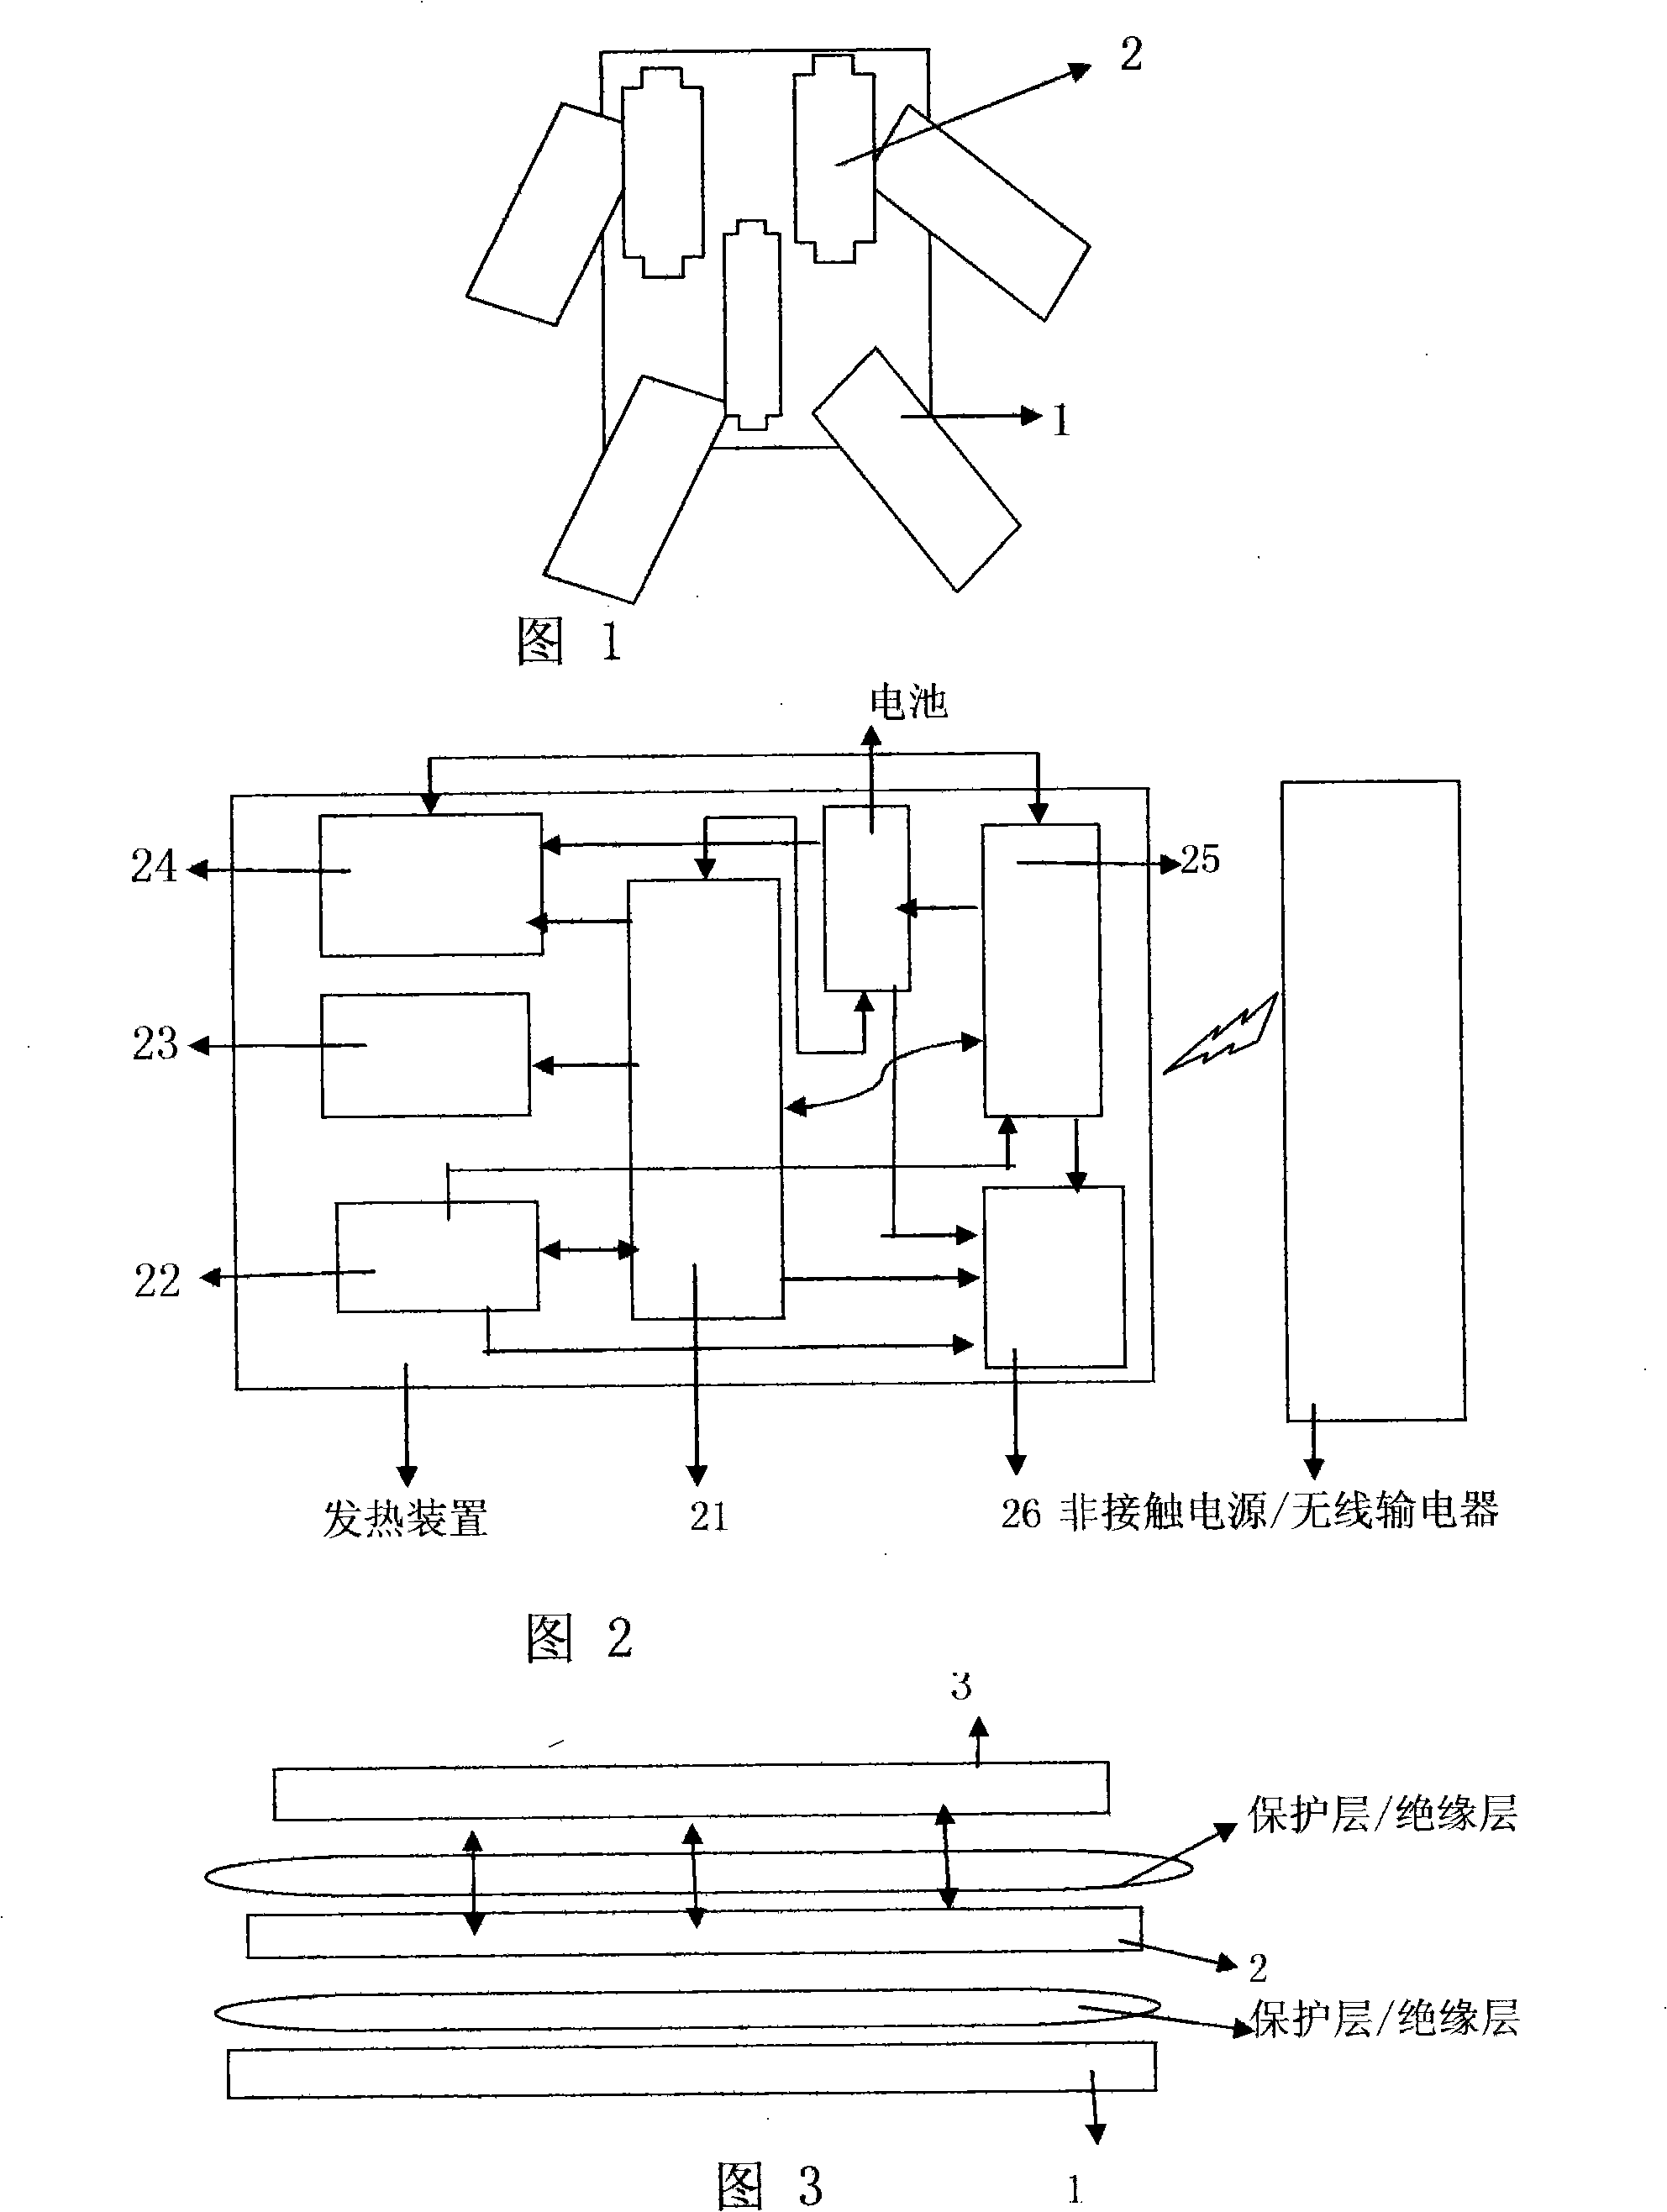 Clothing power supplying and heating system and application thereof